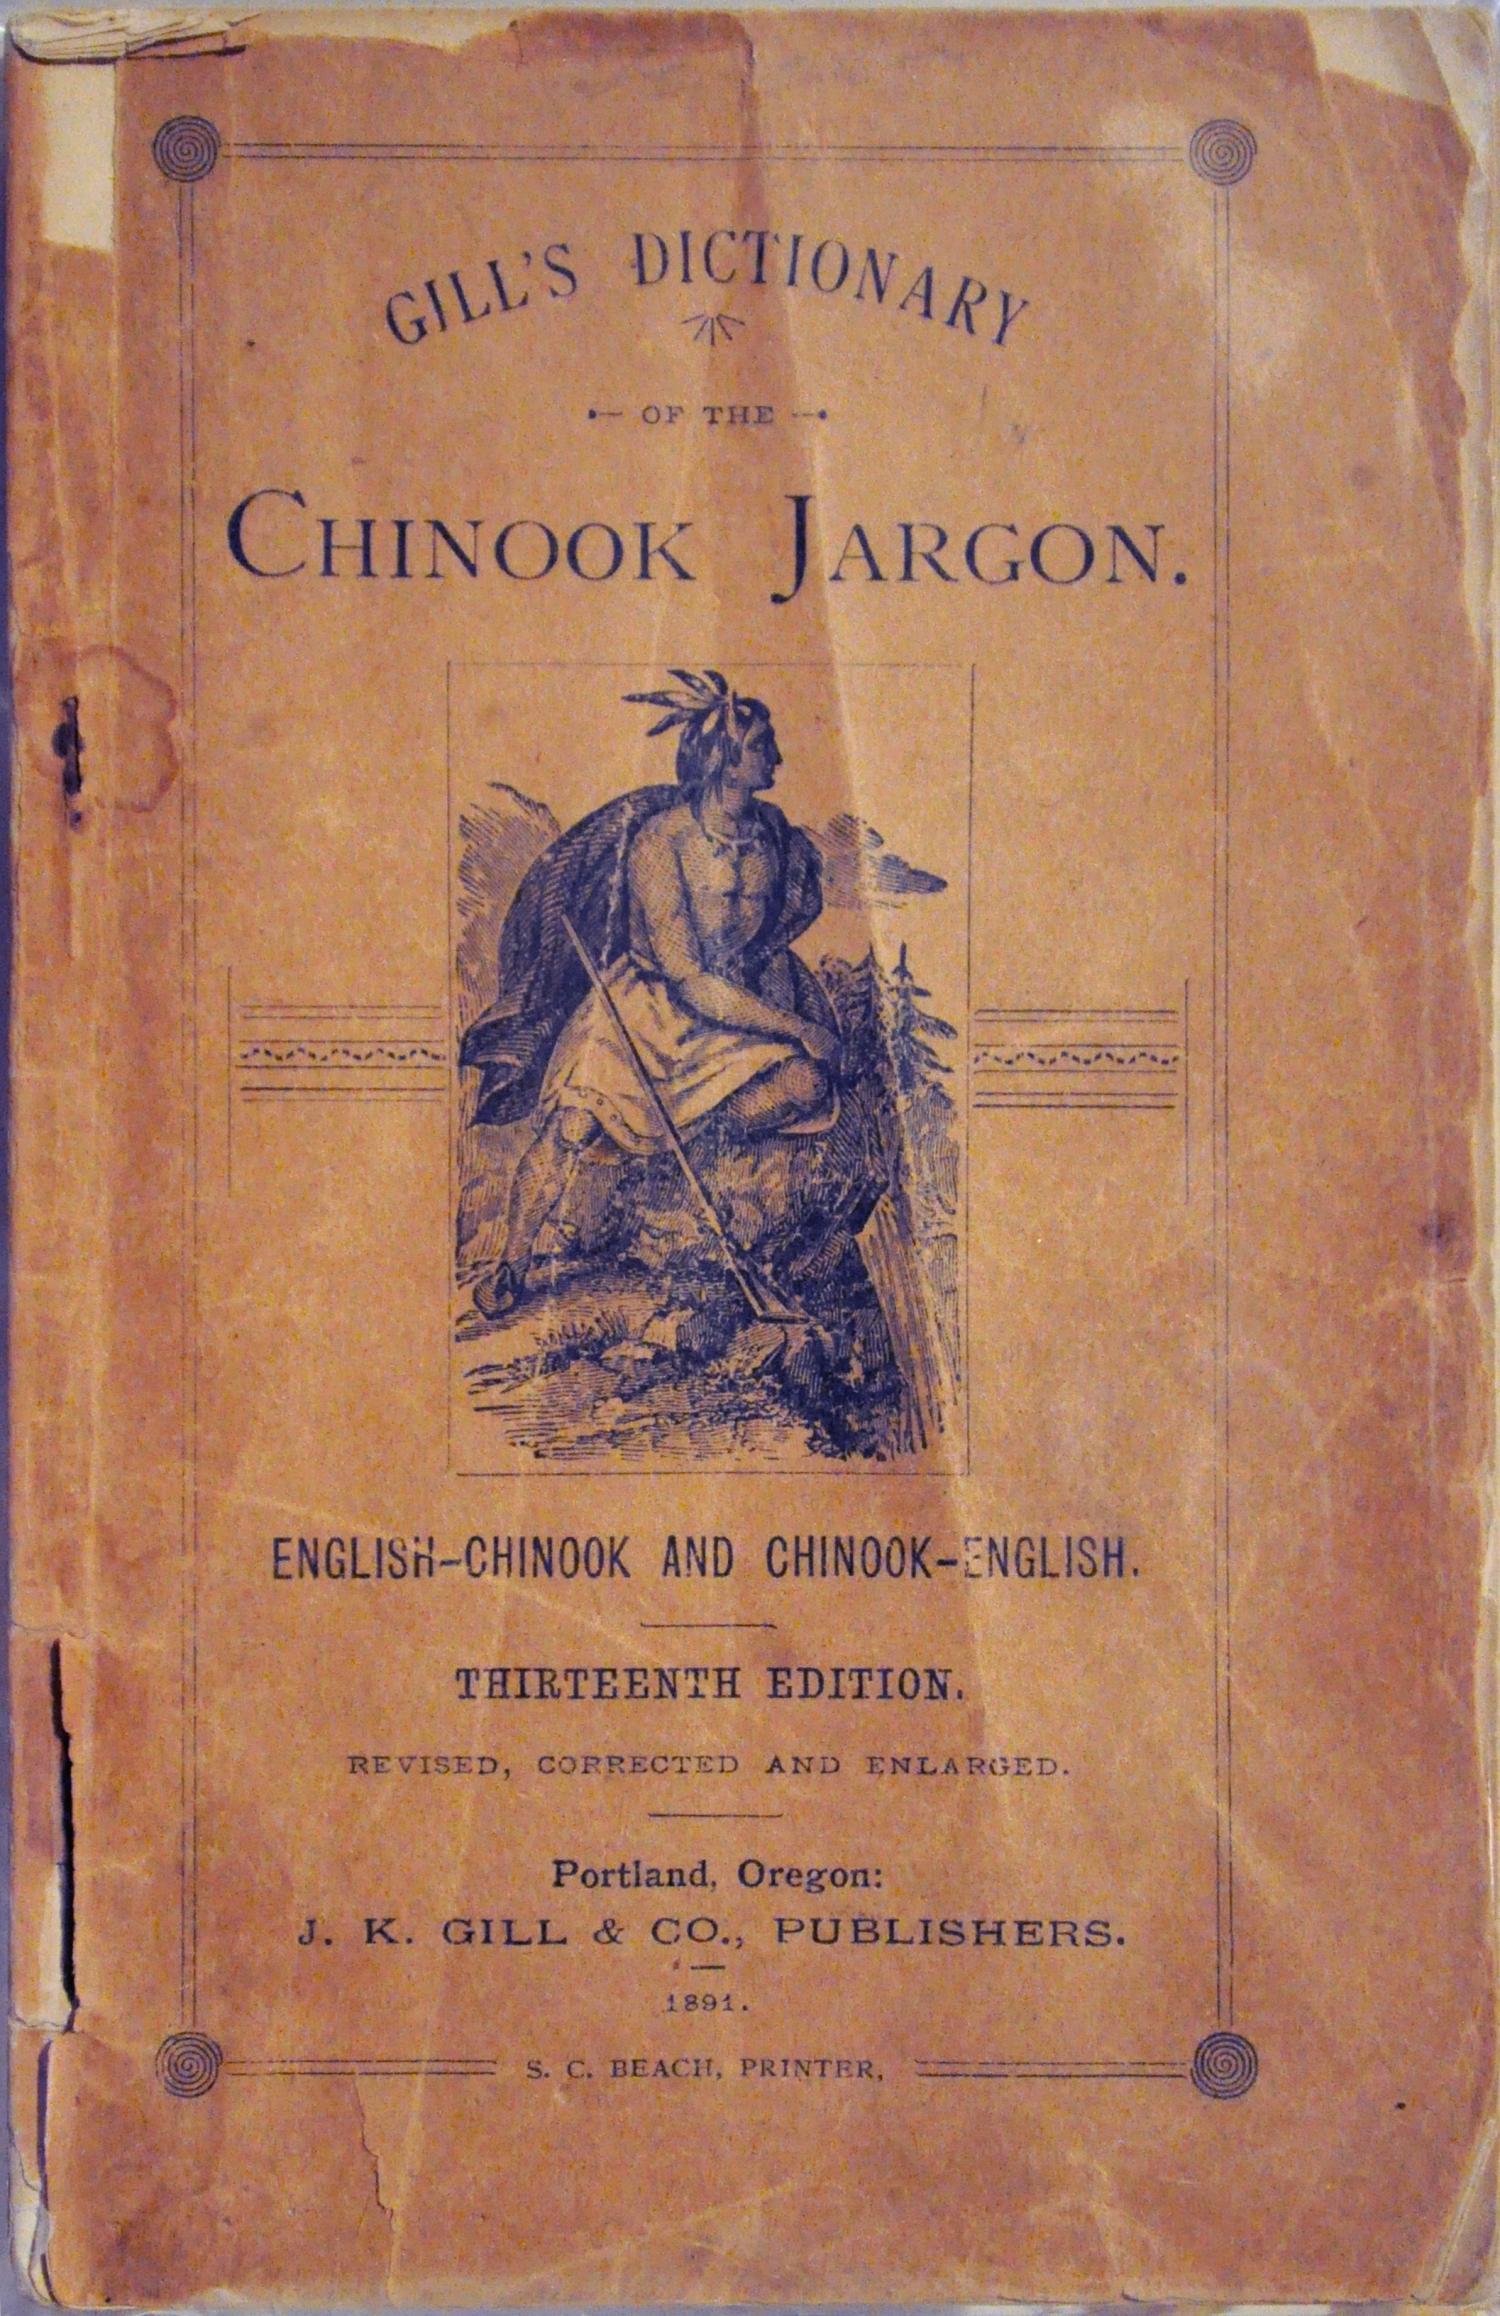 Cover of an English-Chinook dictionary